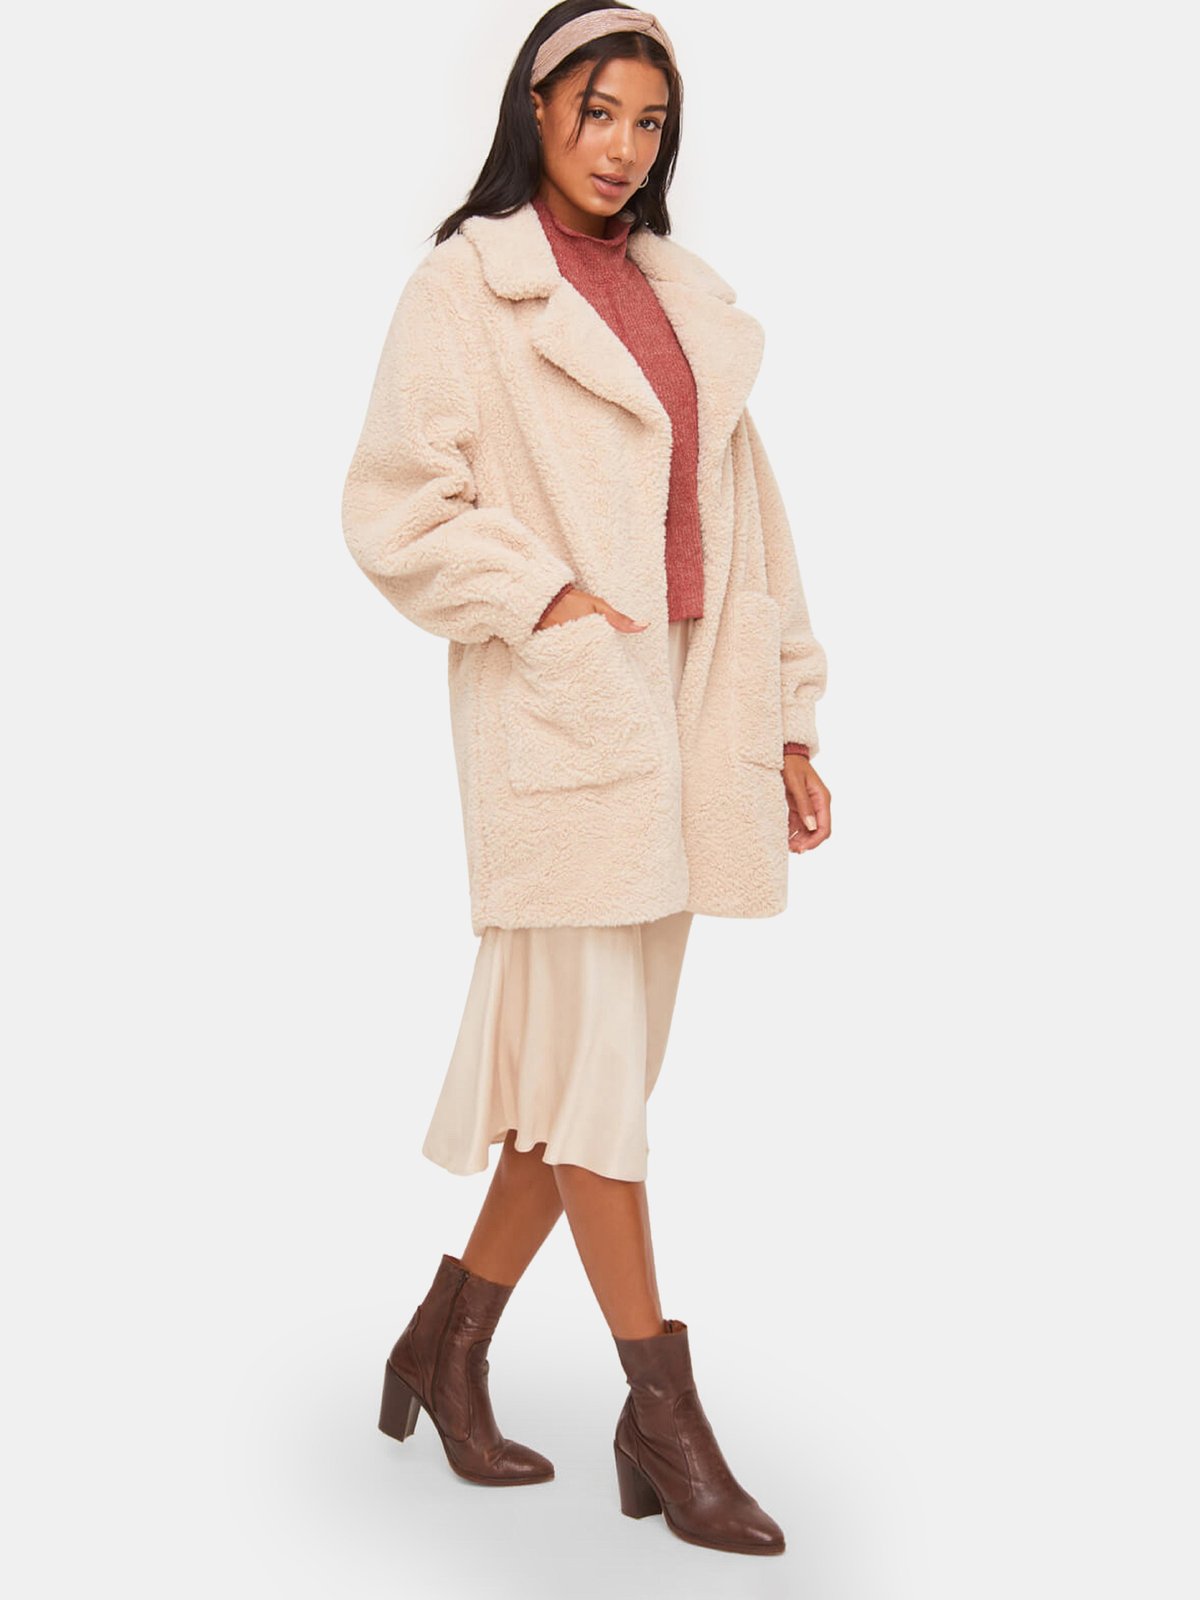 Lush Fuzzy Coat with Front Pockets and Collar | Verishop